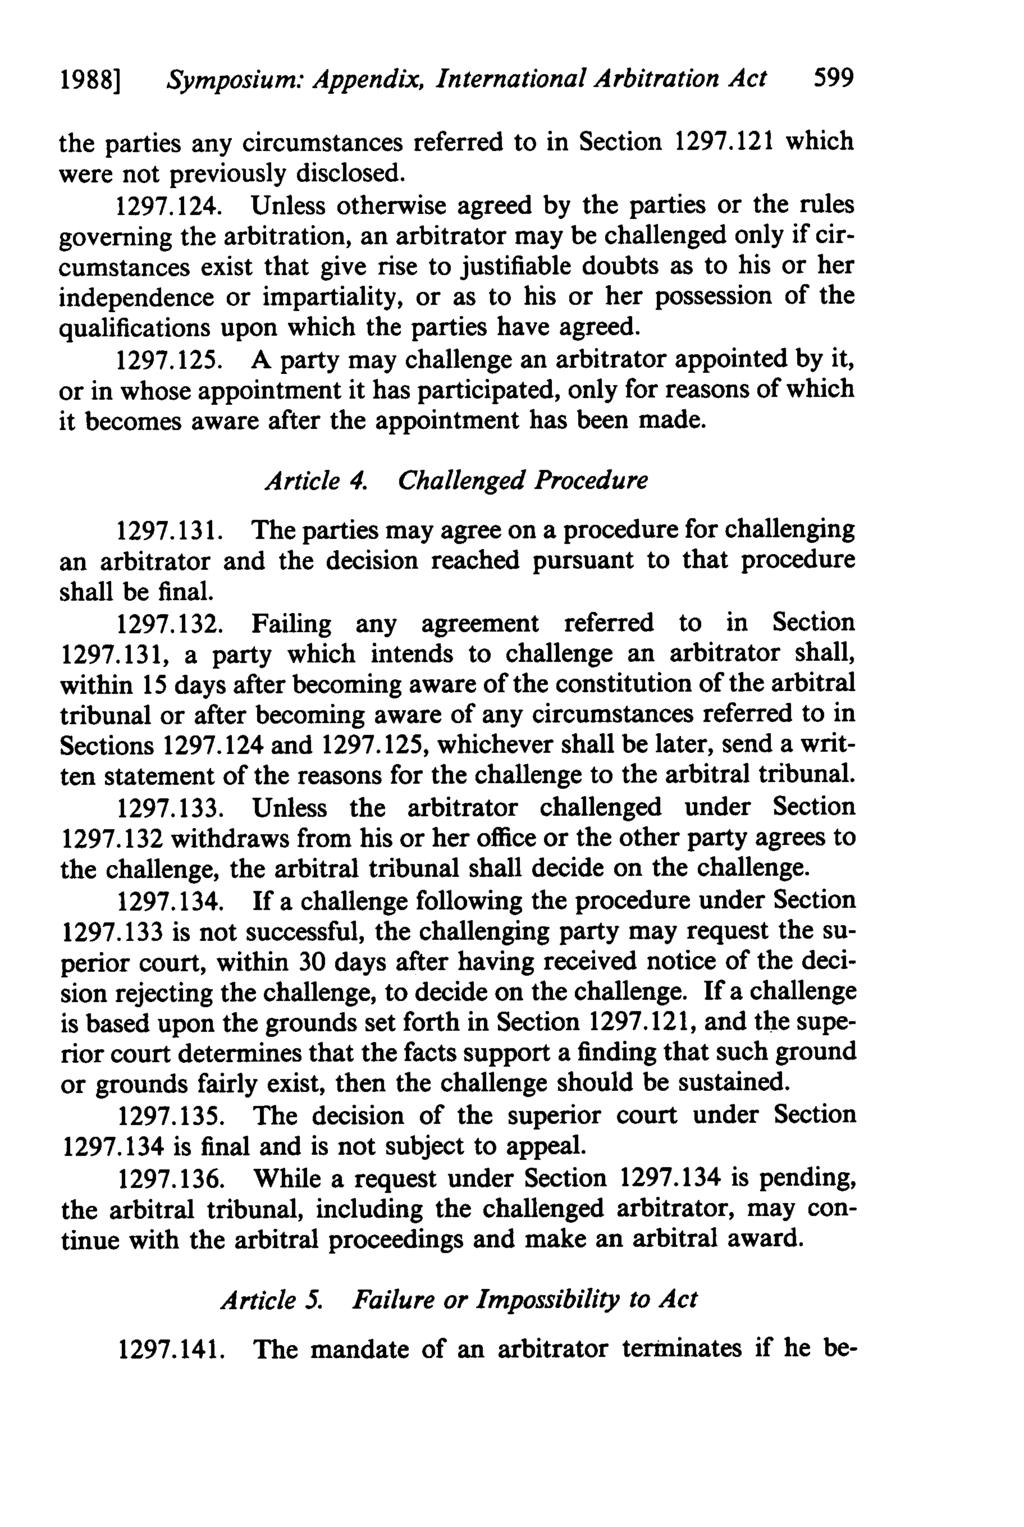 1988] Symposium: Appendix, International Arbitration Act 599 the parties any circumstances referred to in Section 1297.121 which were not previously disclosed. 1297.124.